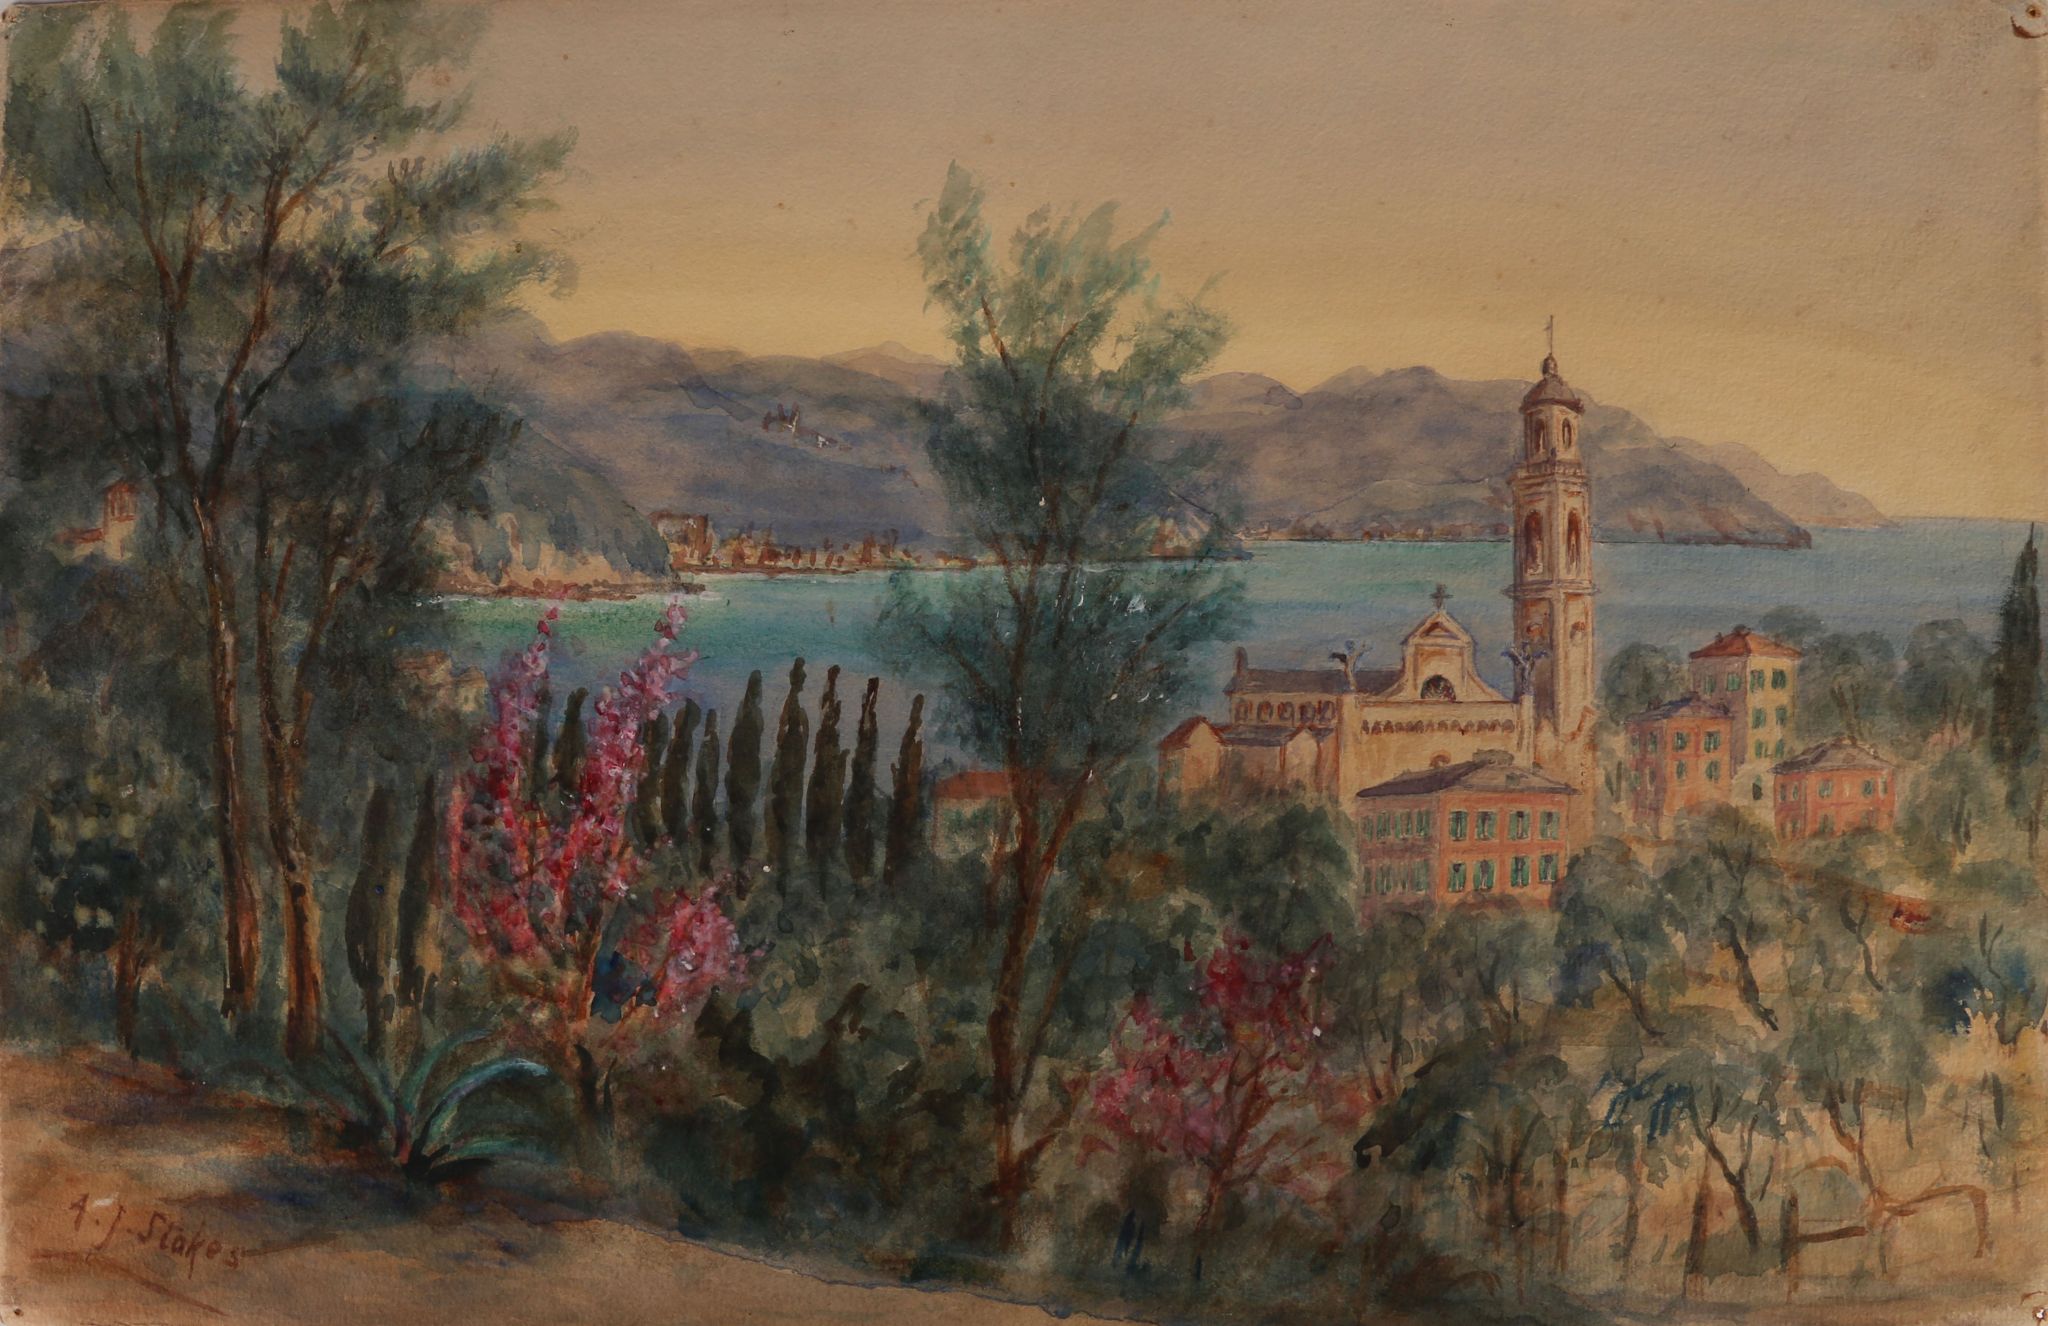 A selection of early 20th Century watercolour studies of the Italian Coast, including views of the - Image 5 of 9